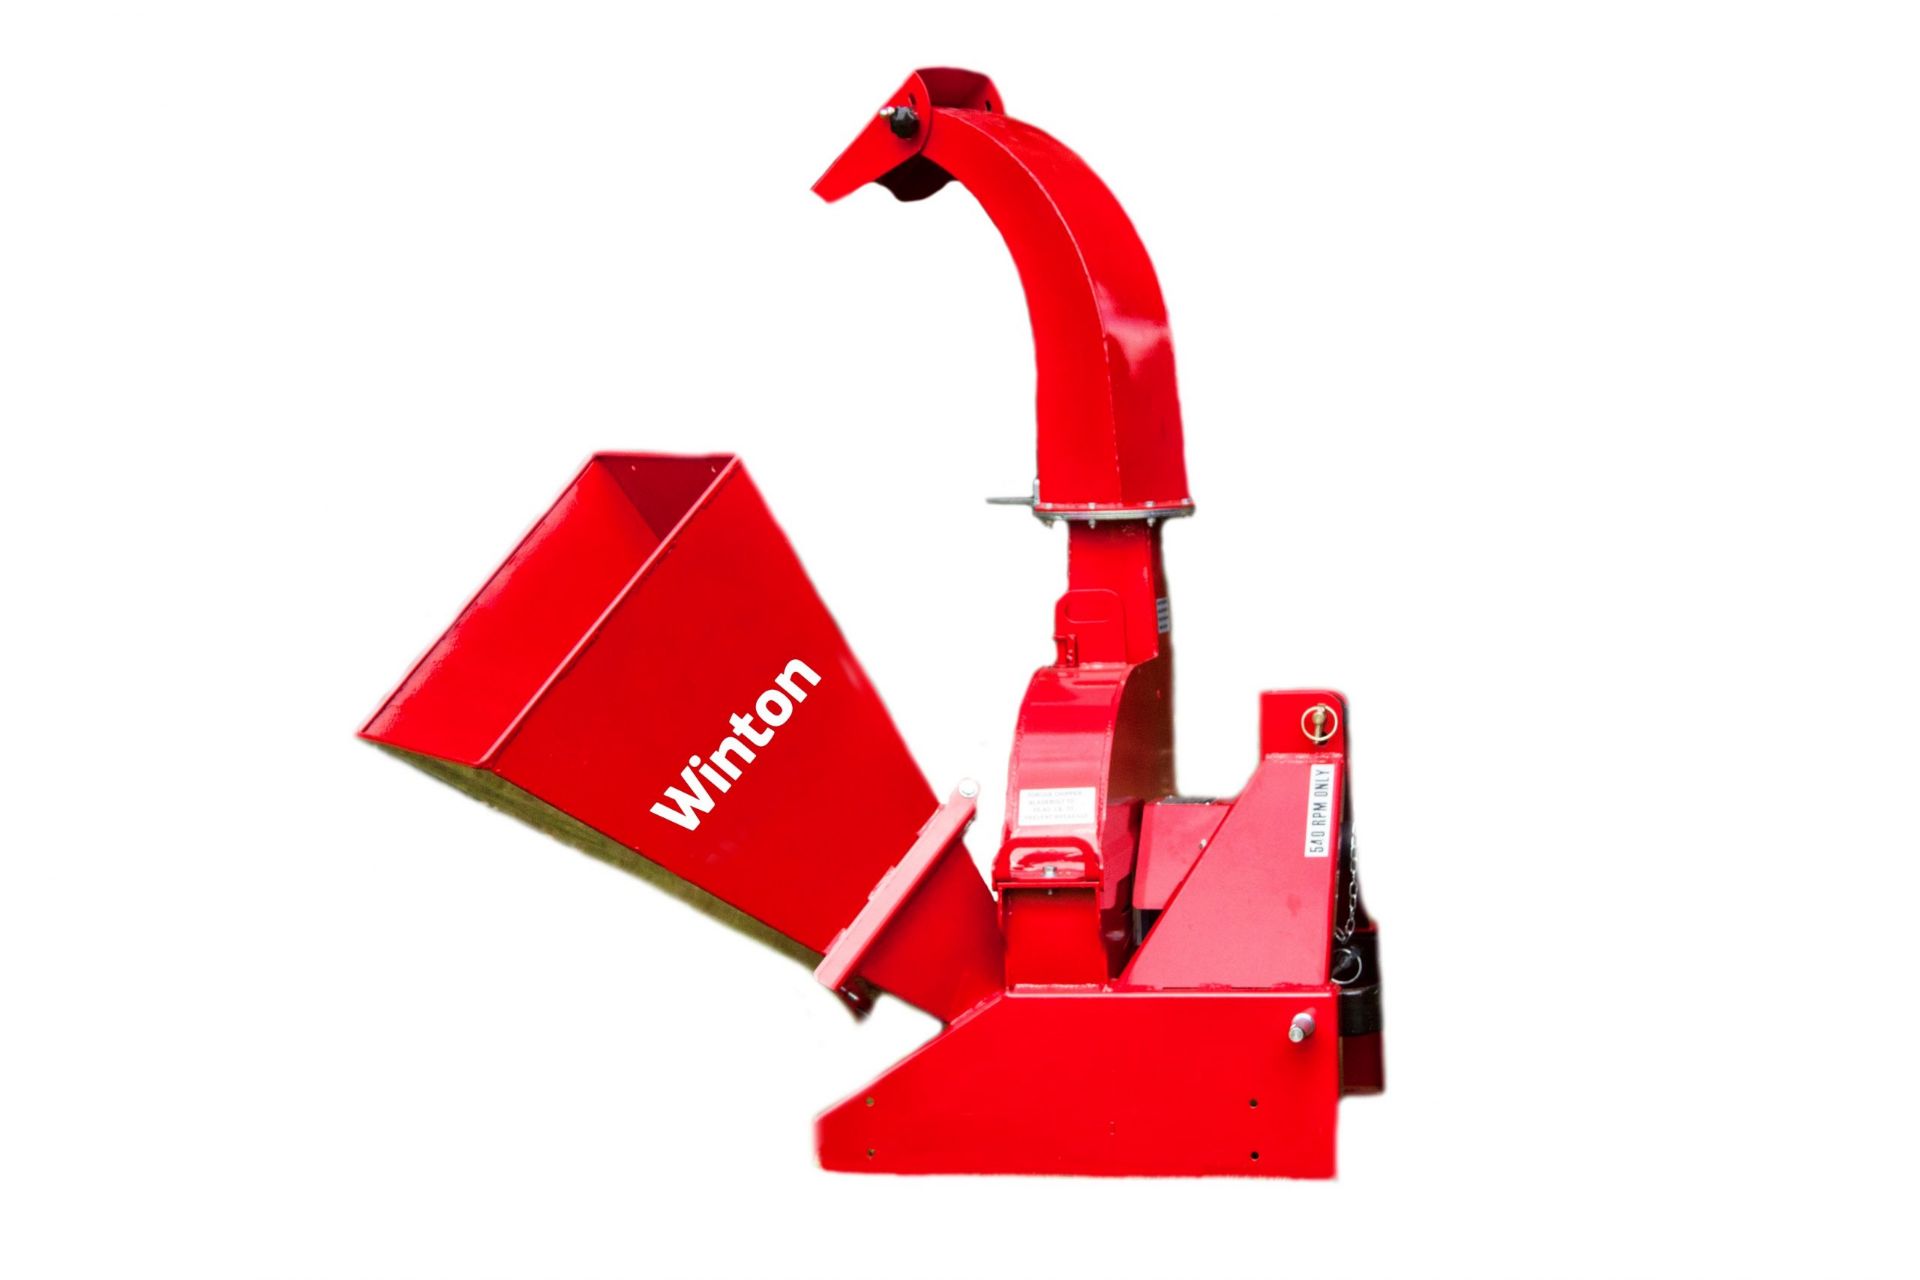 Winton 5 Wood Chipper WWC - Image 3 of 3